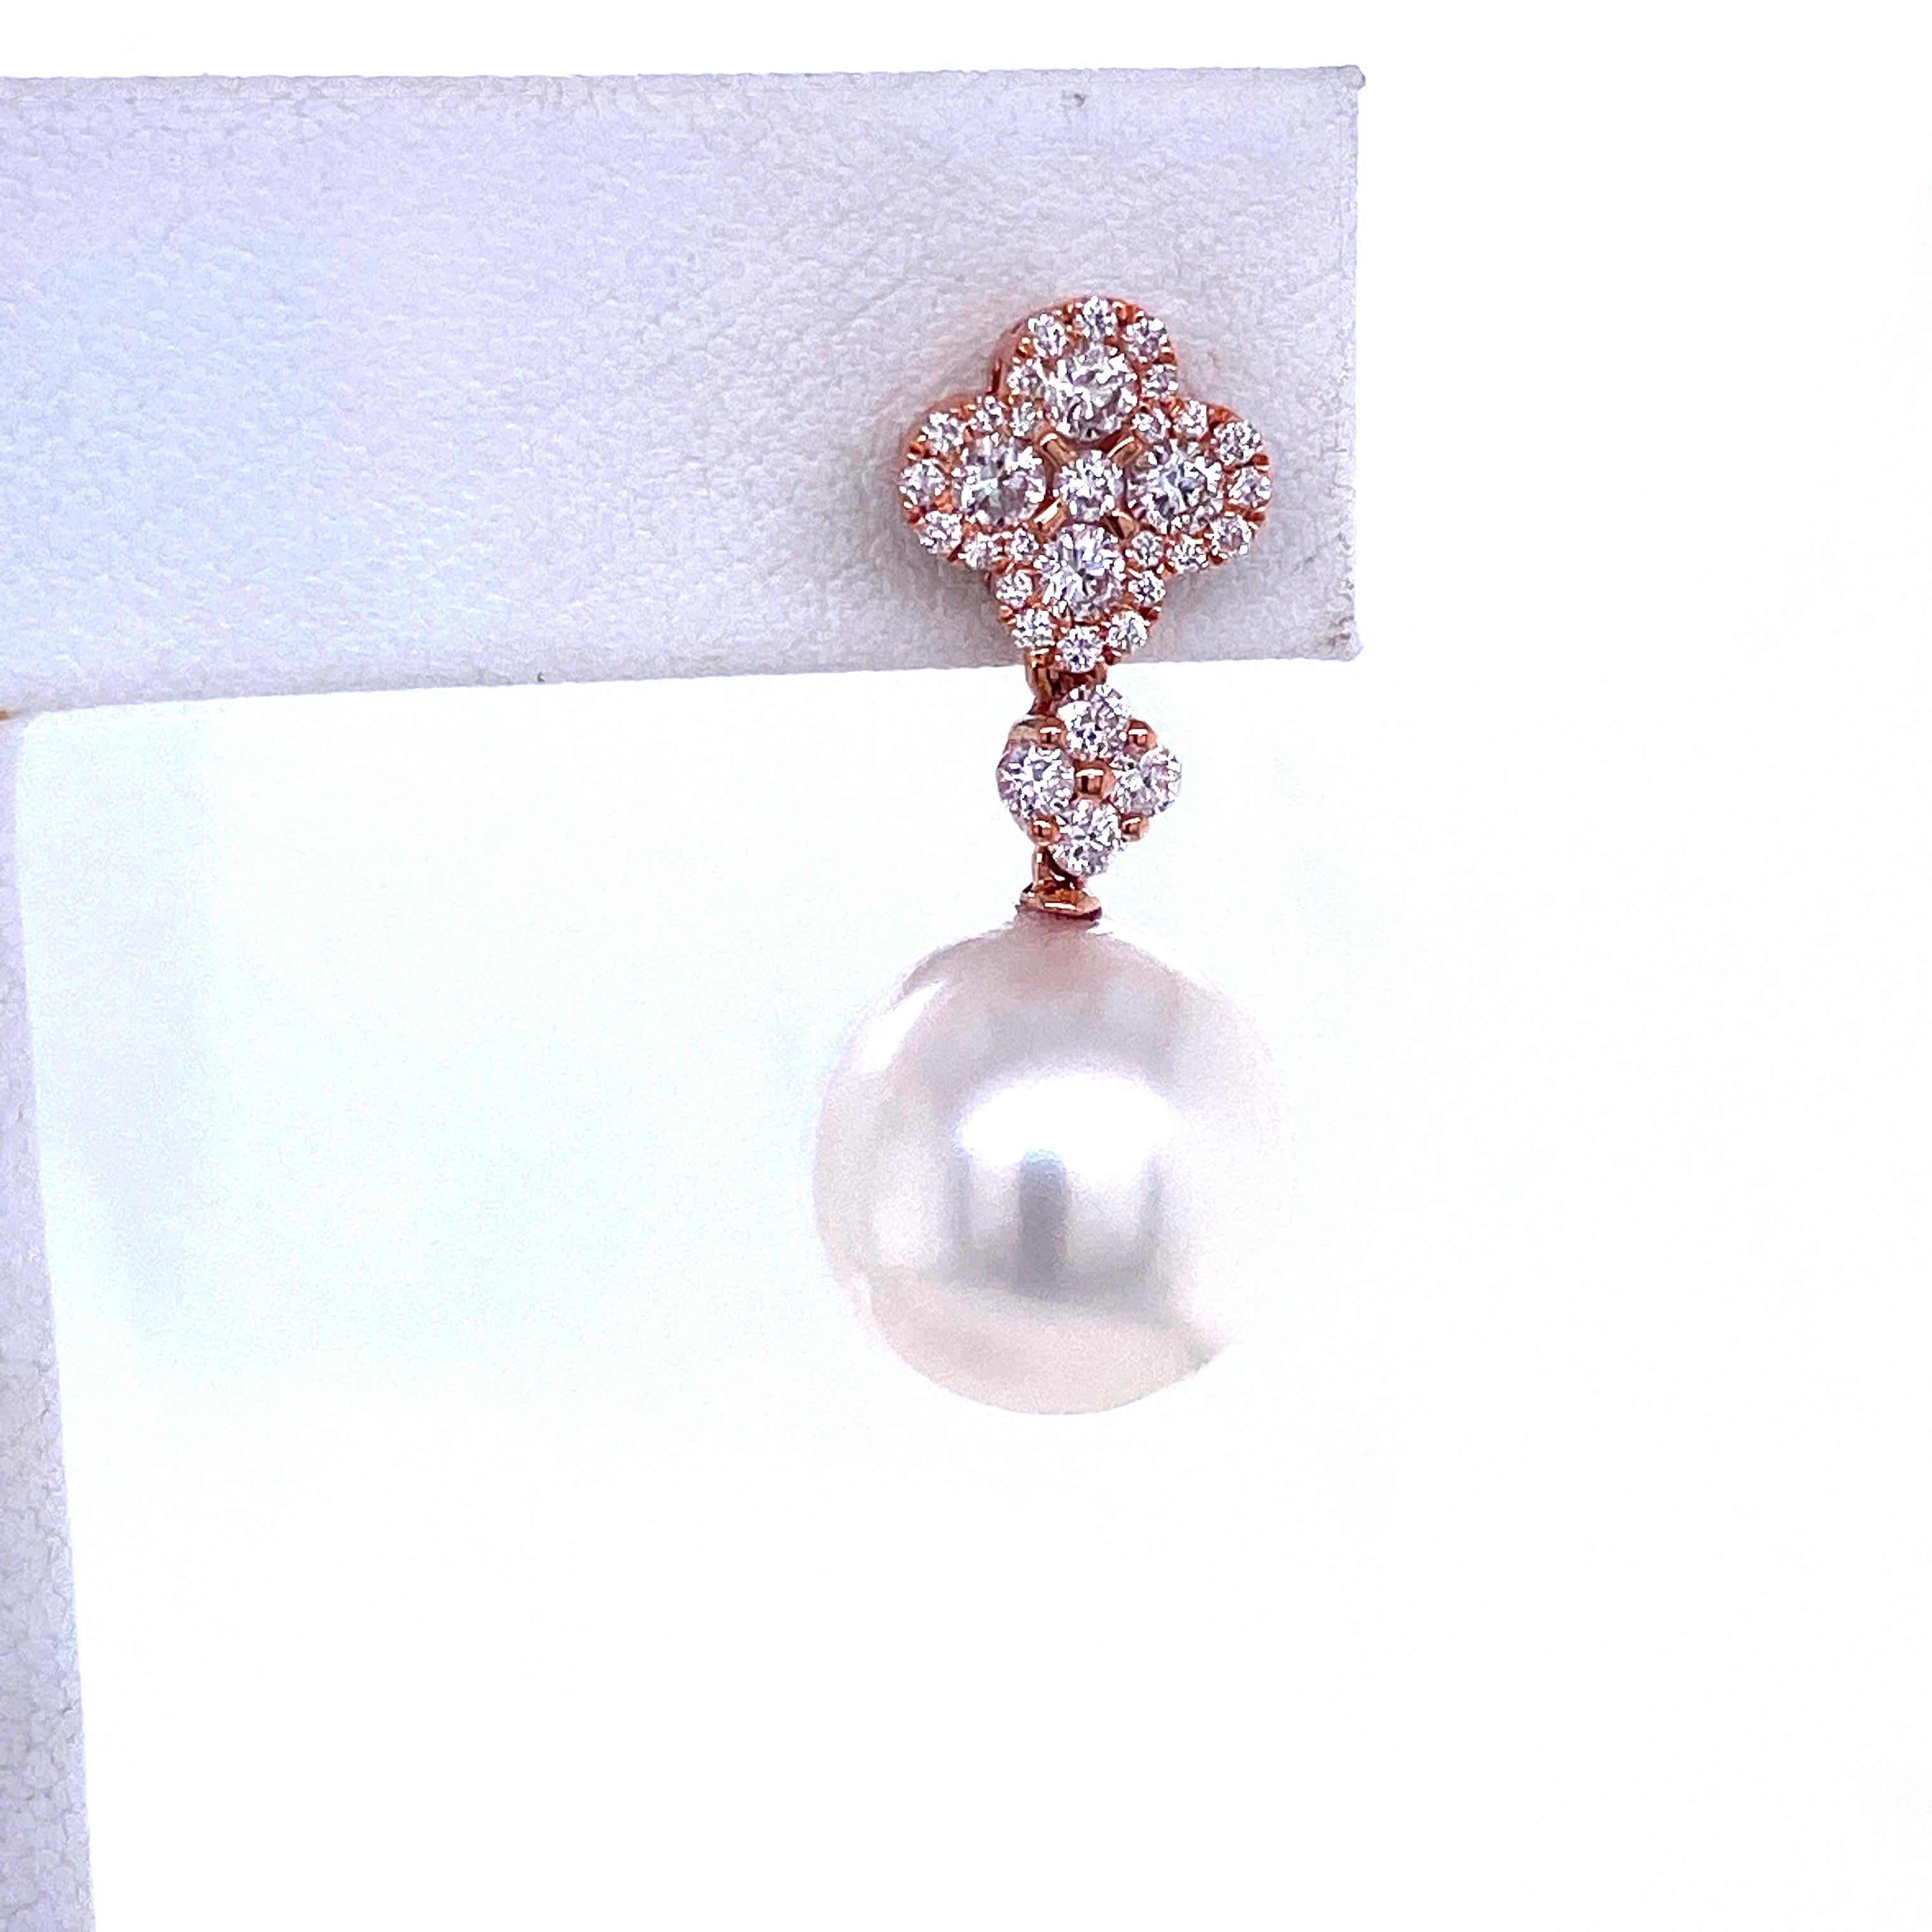 18K Rose gold drop earrings featuring two South Sea Pearls measuring 11-12 mm with 8 round brilliants on top weighing 0.37 carats flanked with 58 smaller diamonds weighing 0.40 carats.
Color G-H
Clarity SI

Pearl can be changed to a Pink, Gold or